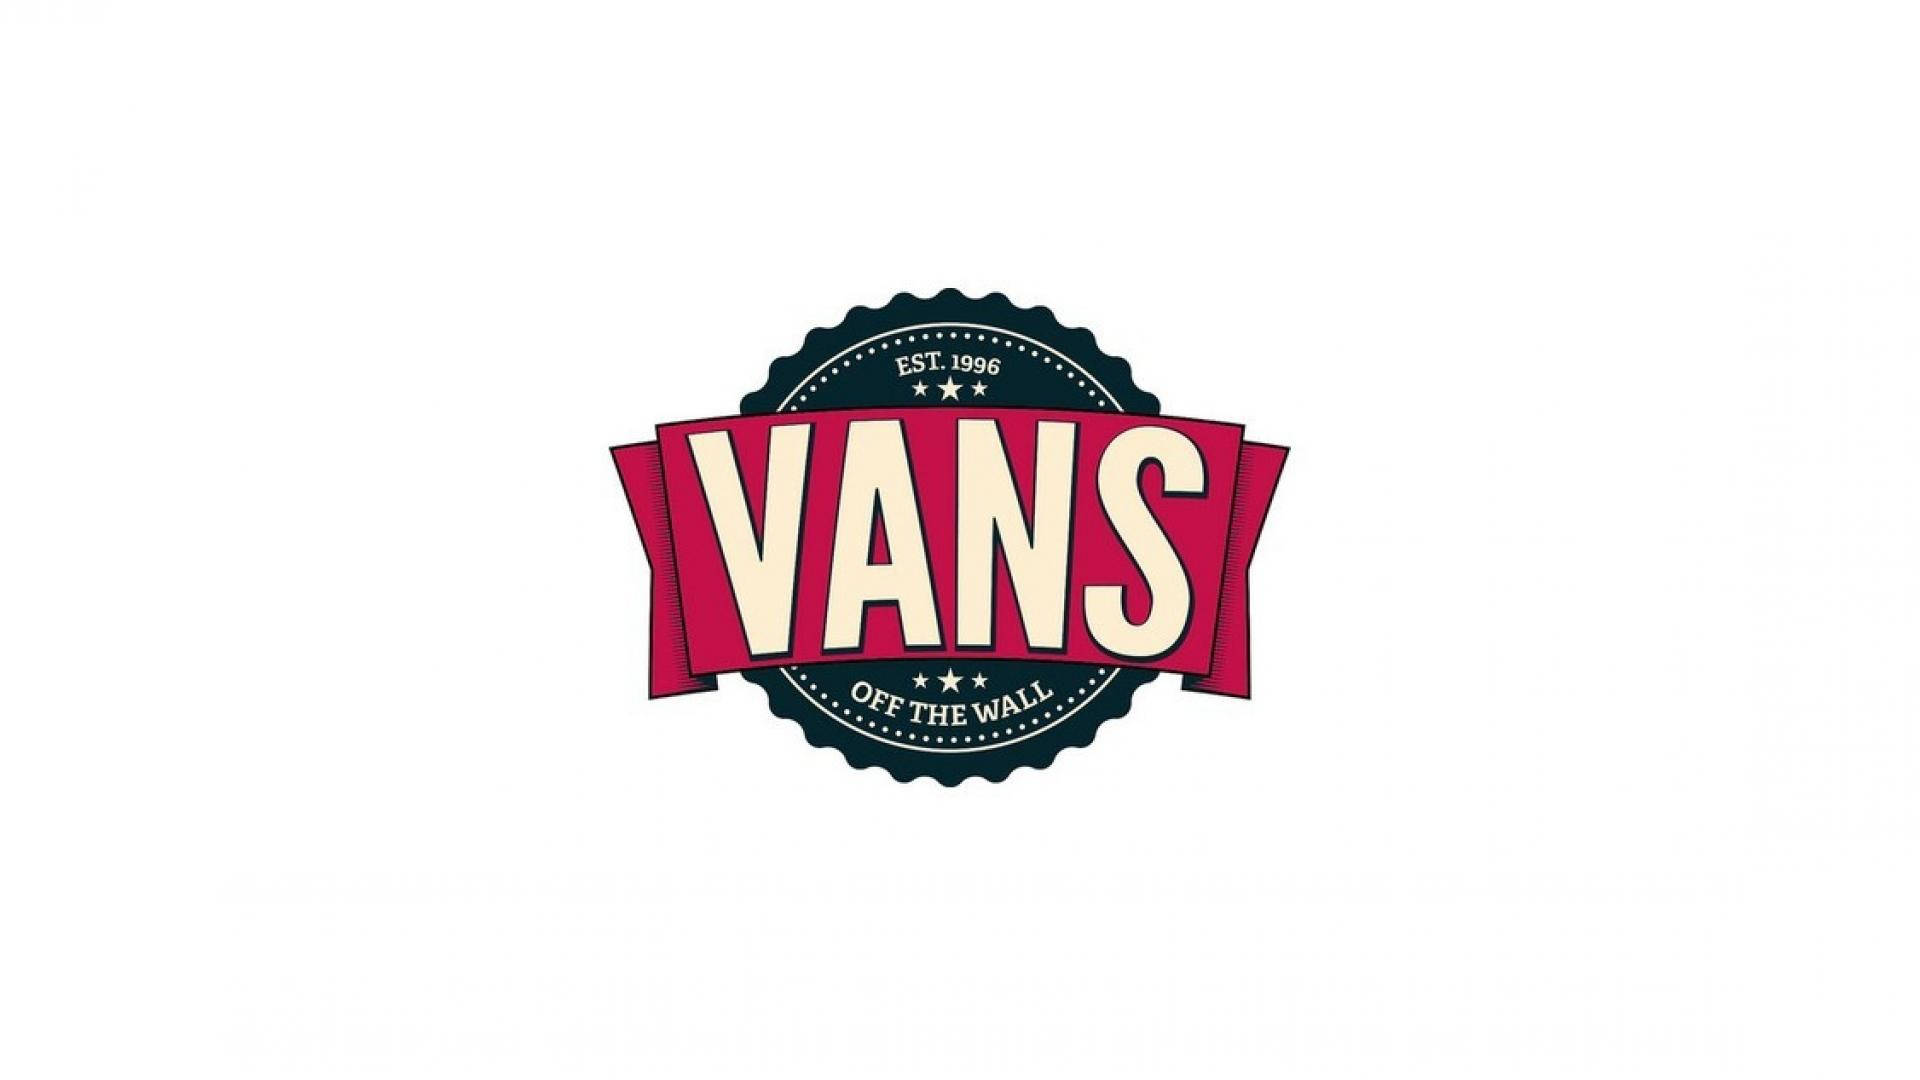 Vans Off The Wall Stamp Background